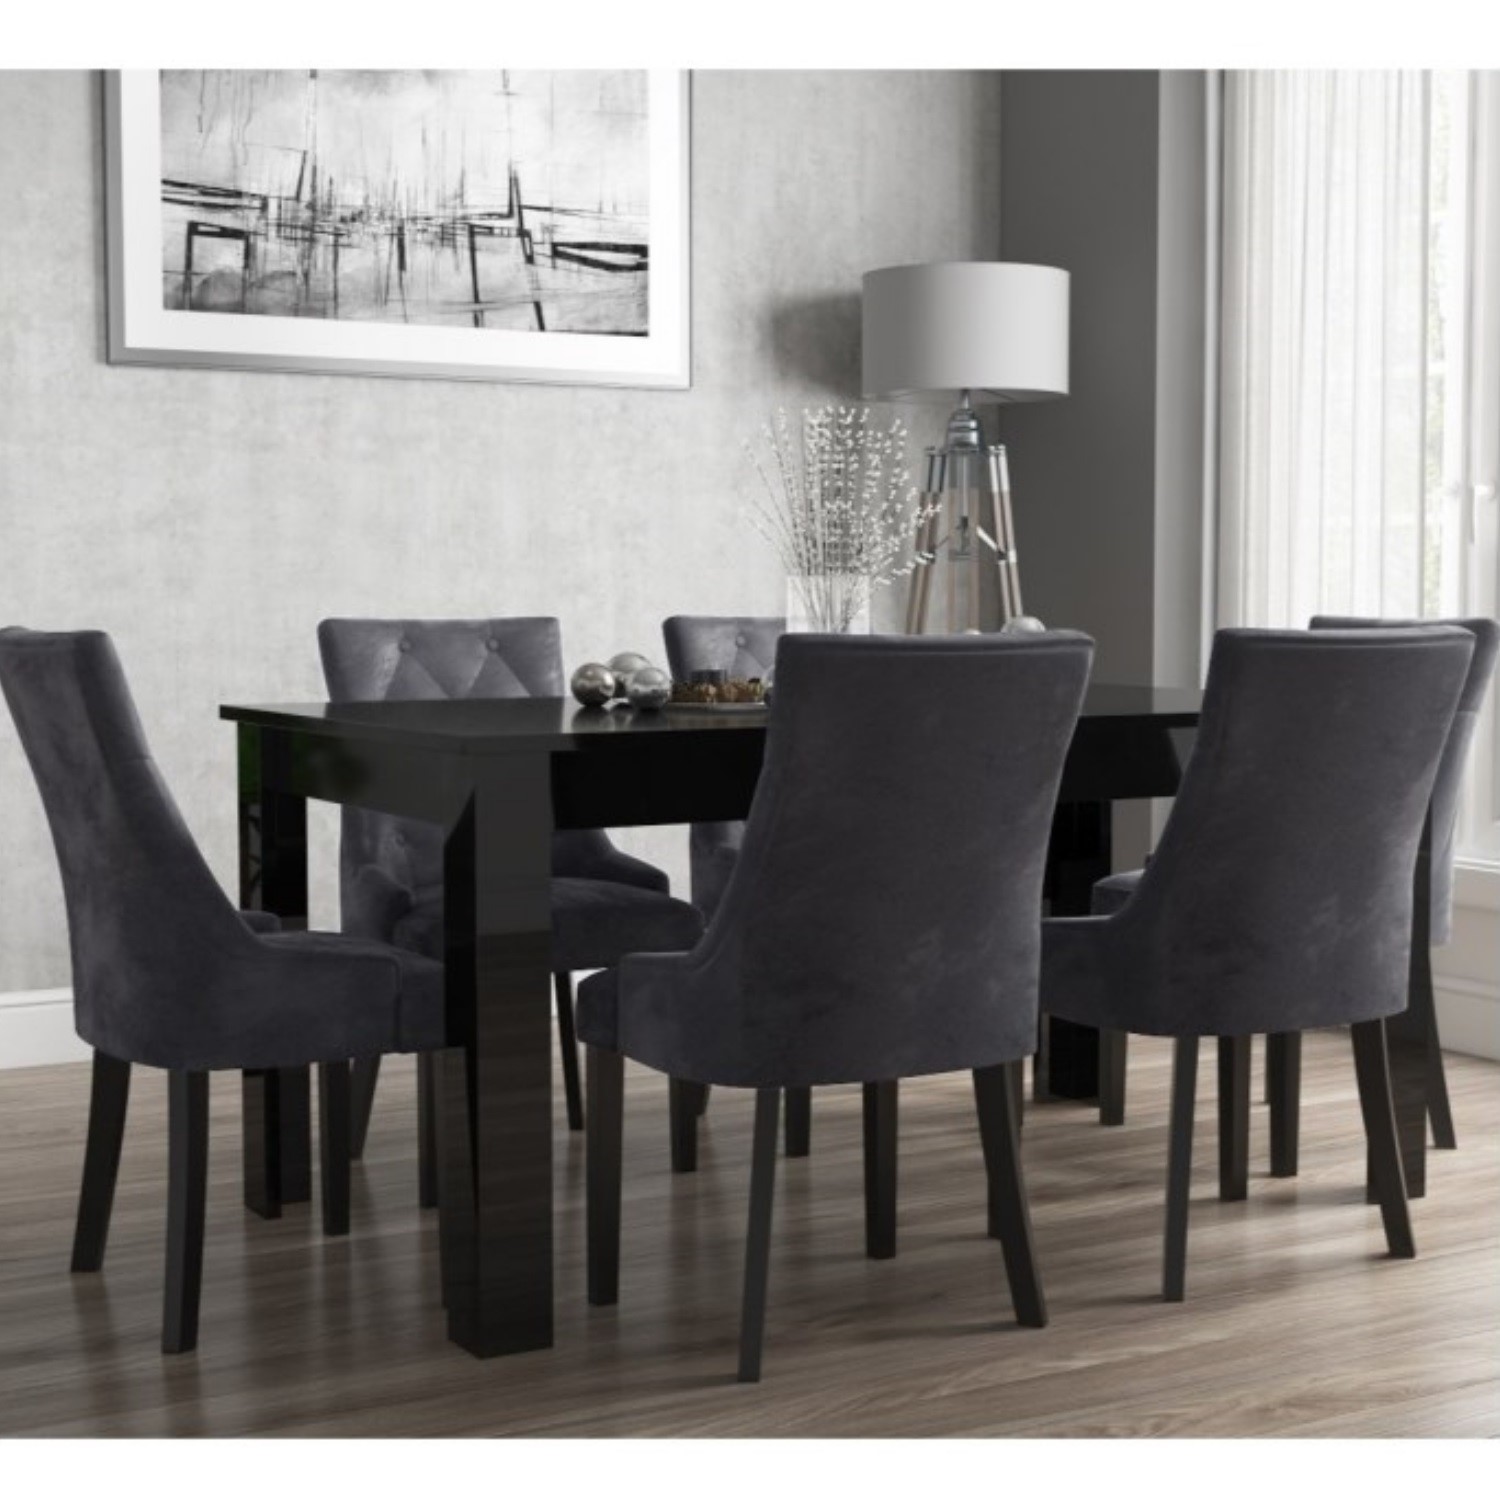 Extendable Dining Table In Black High, High Gloss Black Dining Table And Chairs